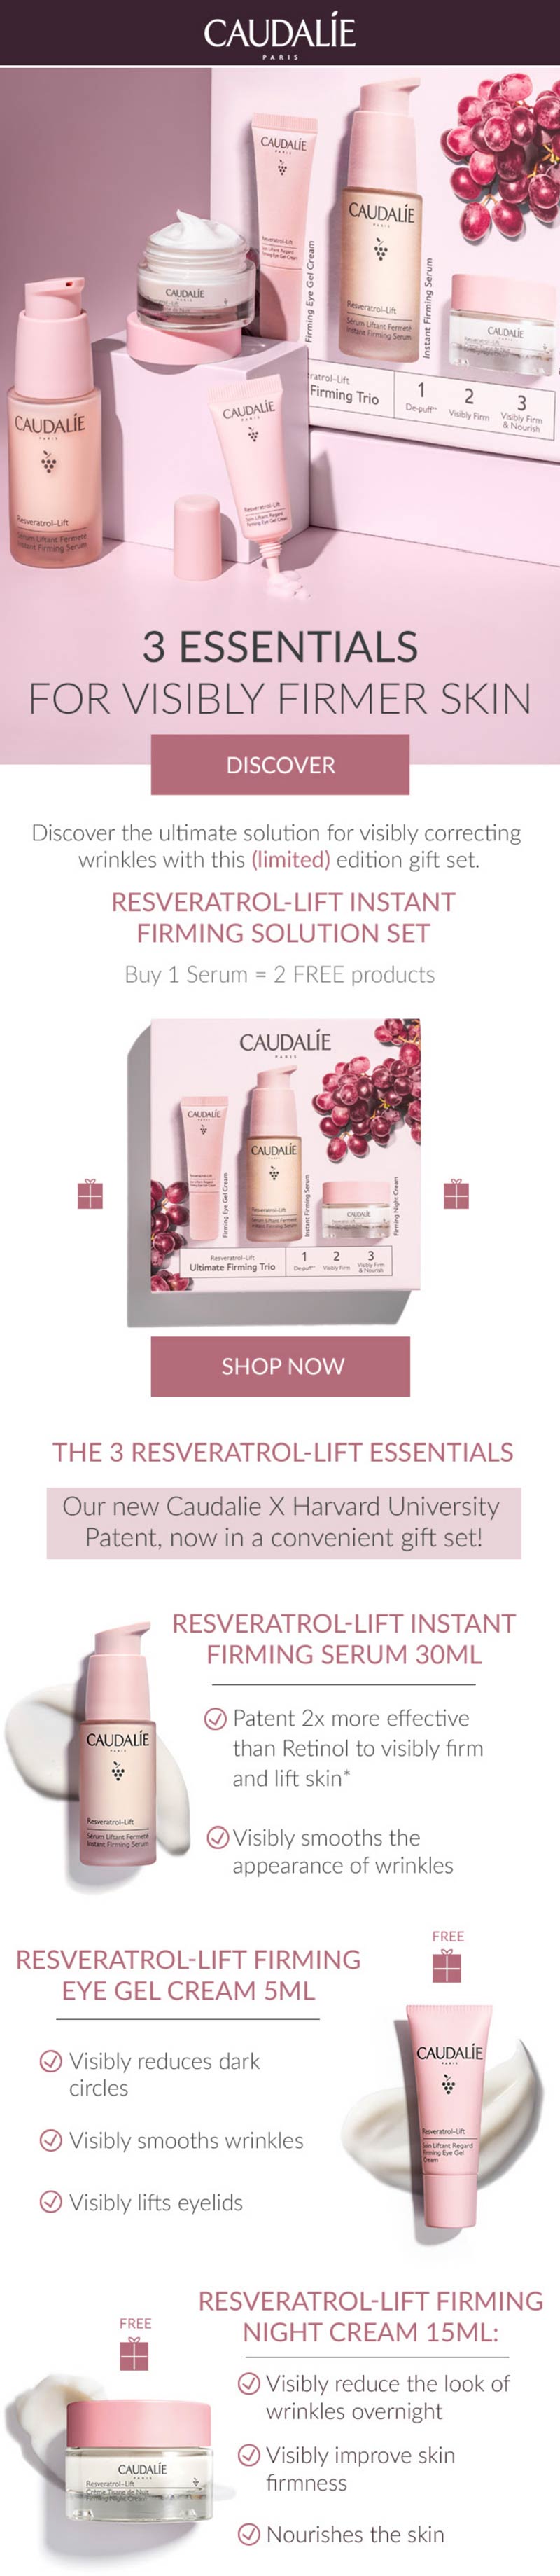 Caudalie stores Coupon  2 free products with your serum purchase at Caudalie #caudalie 